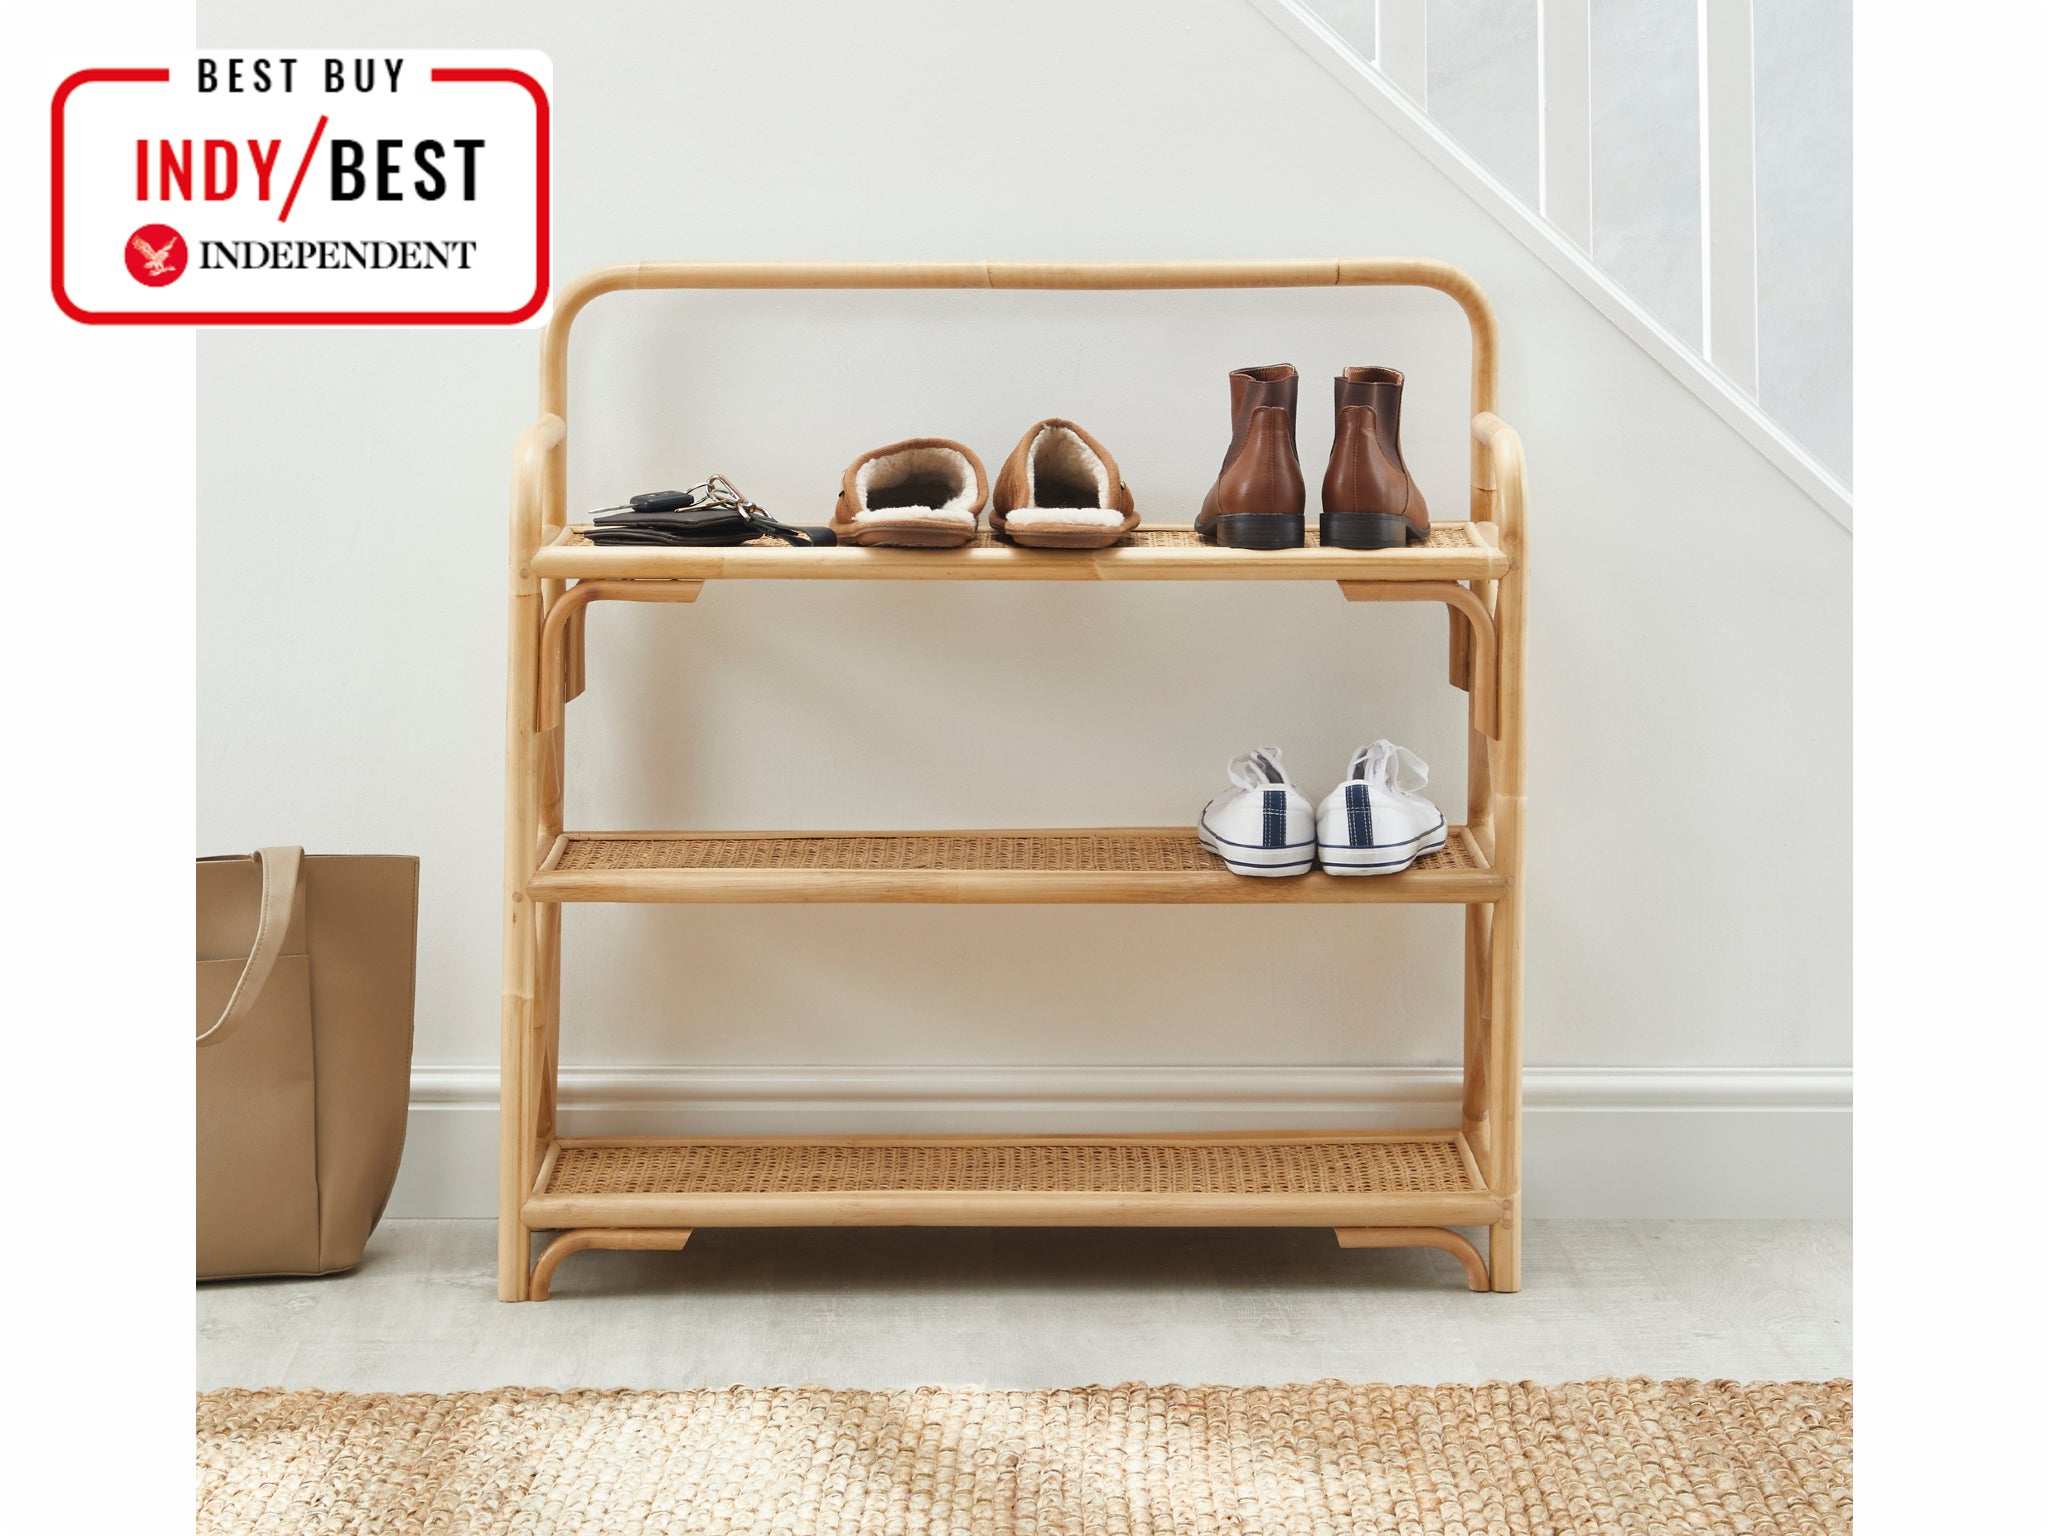 indybest french cane shoe rack.jpg